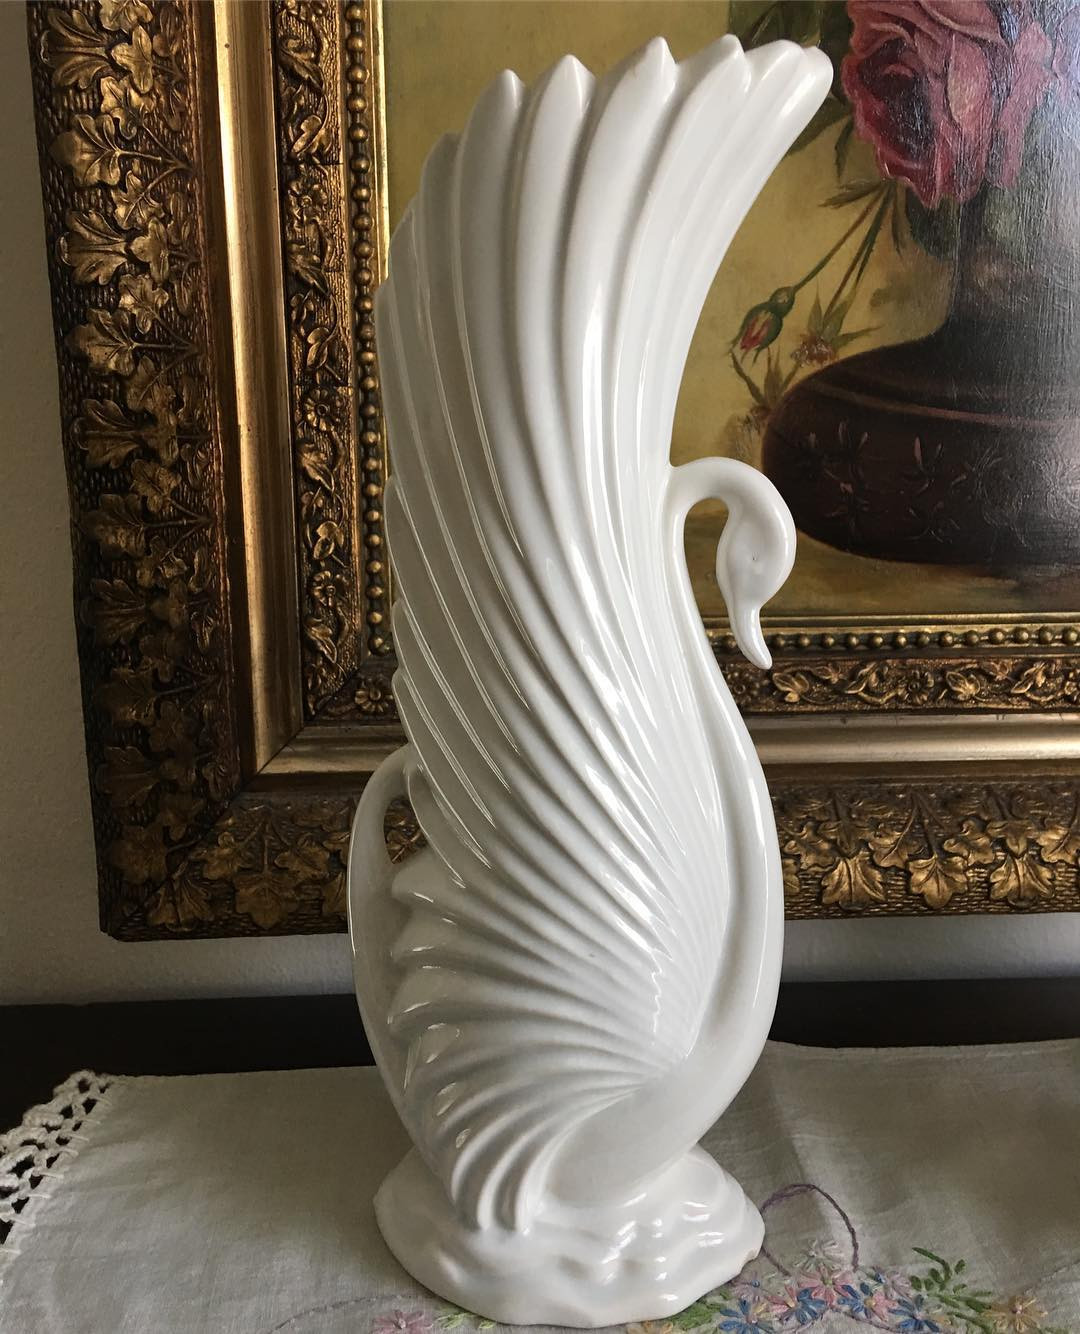 25 Elegant Ak Kaiser Porcelain Vase 2024 free download ak kaiser porcelain vase of oldvase hash tags deskgram in thought i had really scored on this maddox u s a vase for 12 not so